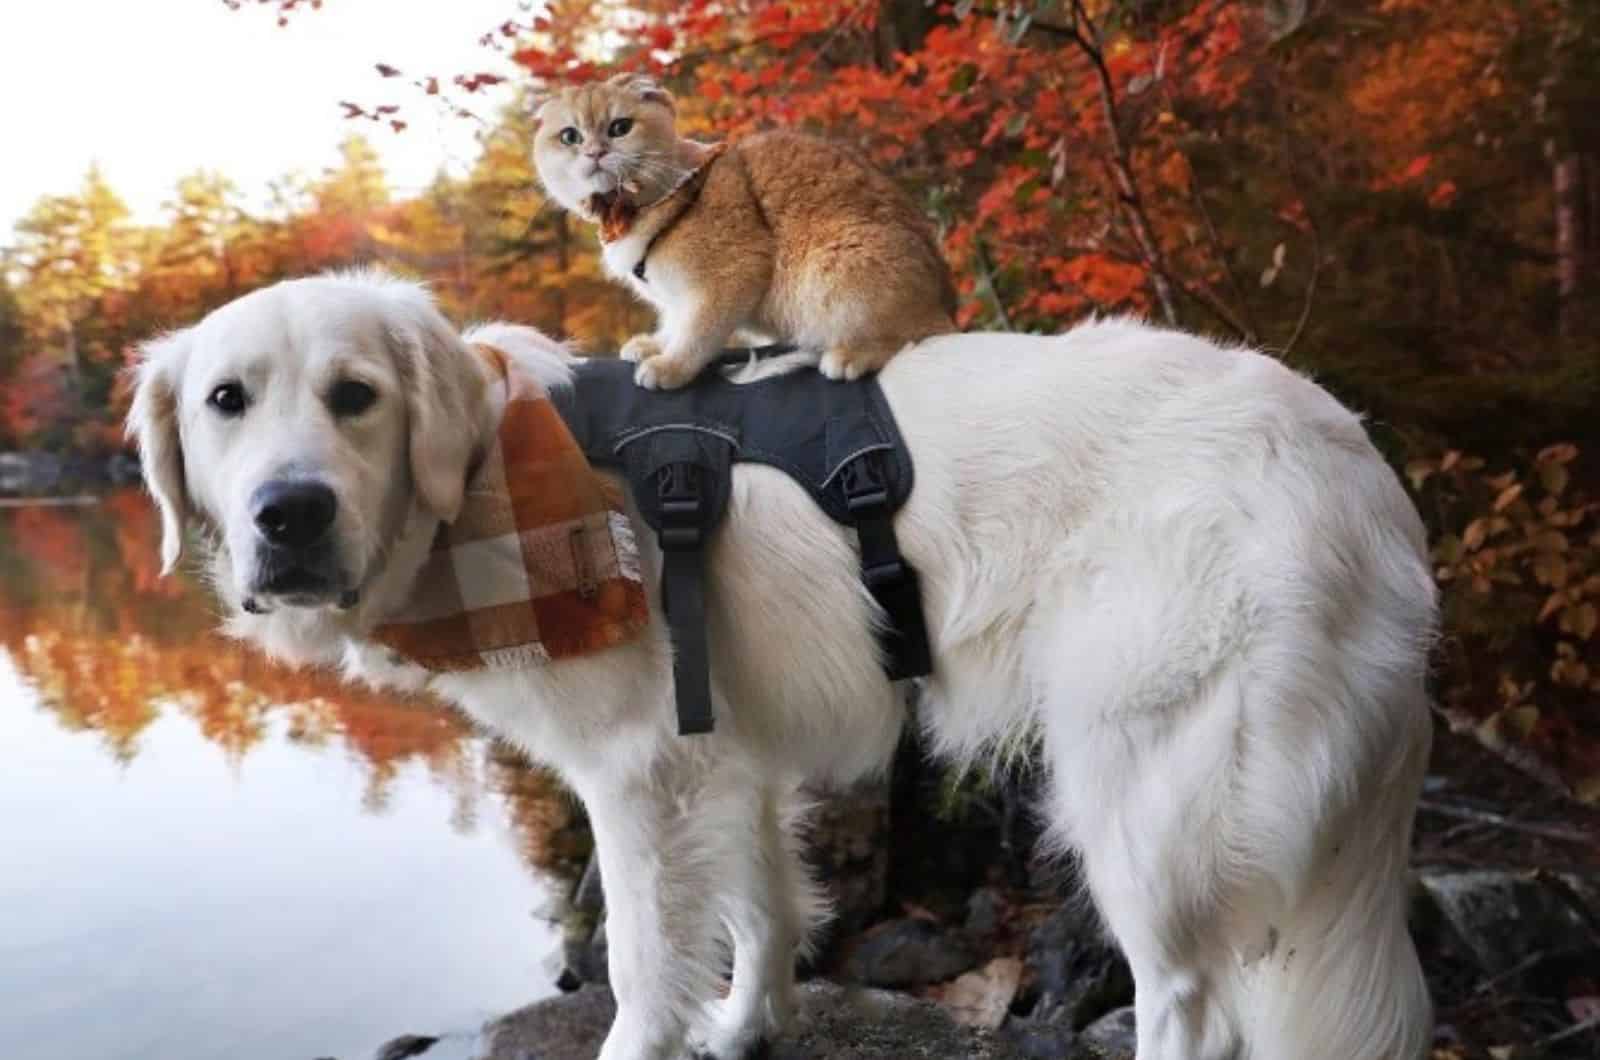 cat standing on dogs back